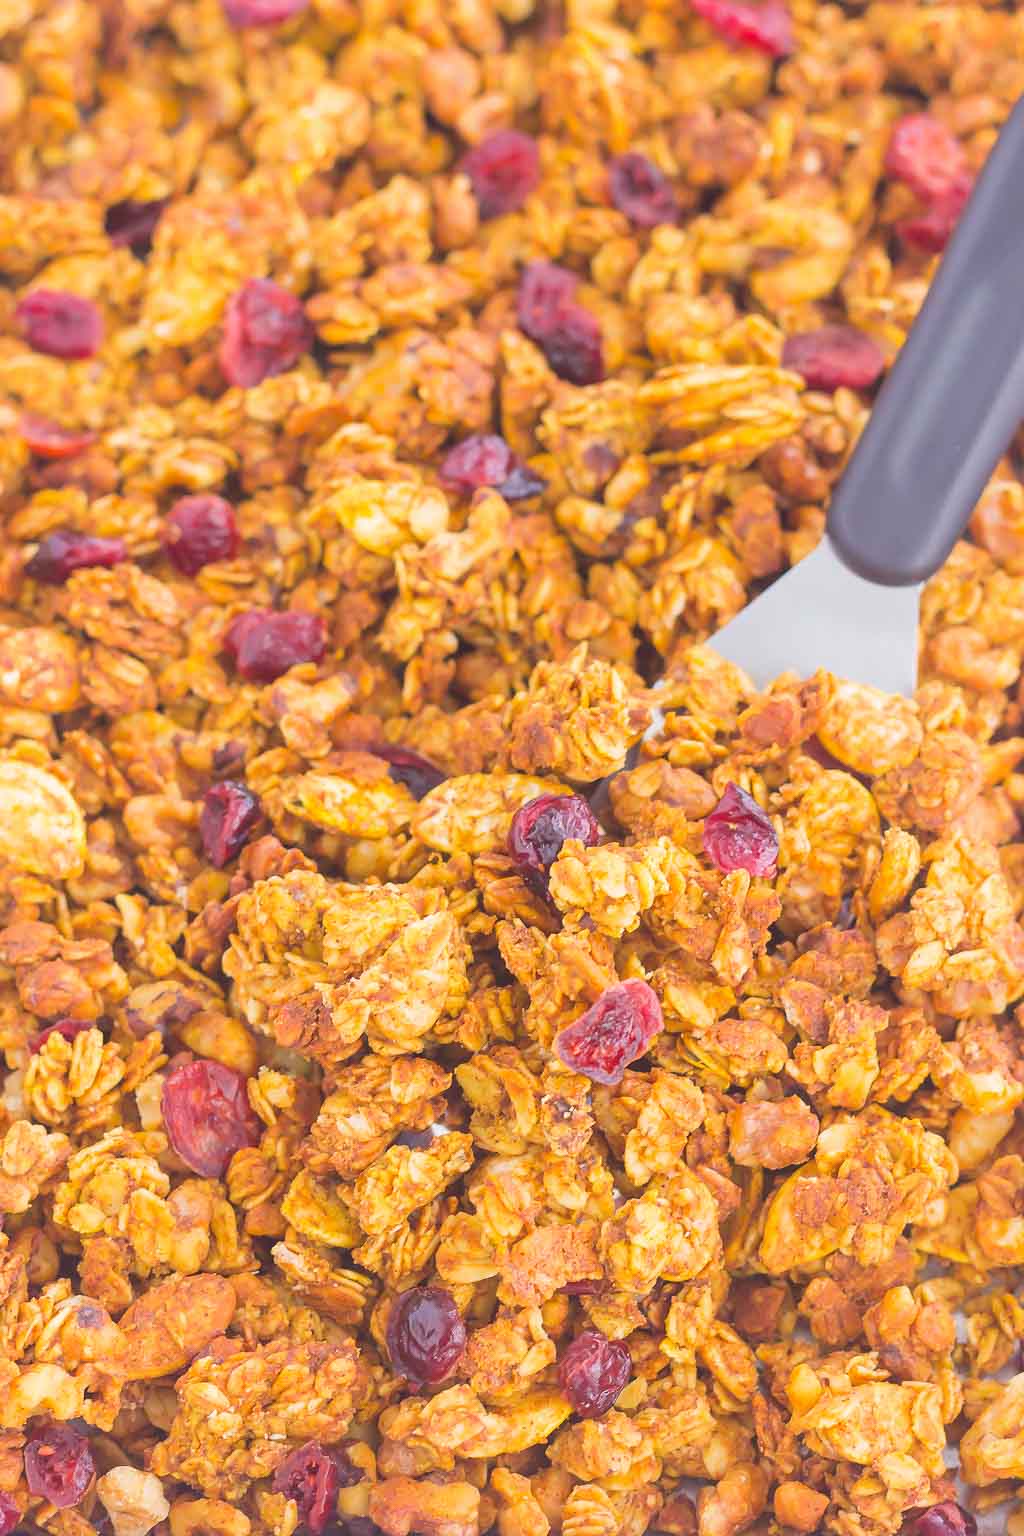 This Pumpkin Spice Granola is a delicious way to savor the flavors of fall. Hearty oats, crunchy walnuts, dried cranberries and fall spices give this granola both texture and flavor. It's simple to make and perfect to eat by the handful, with milk, or on top of yogurt or ice cream! #granola #pumpkingranola #homemadegranola #pumpkinbreakfast #pumpkinsnack #healthygranola